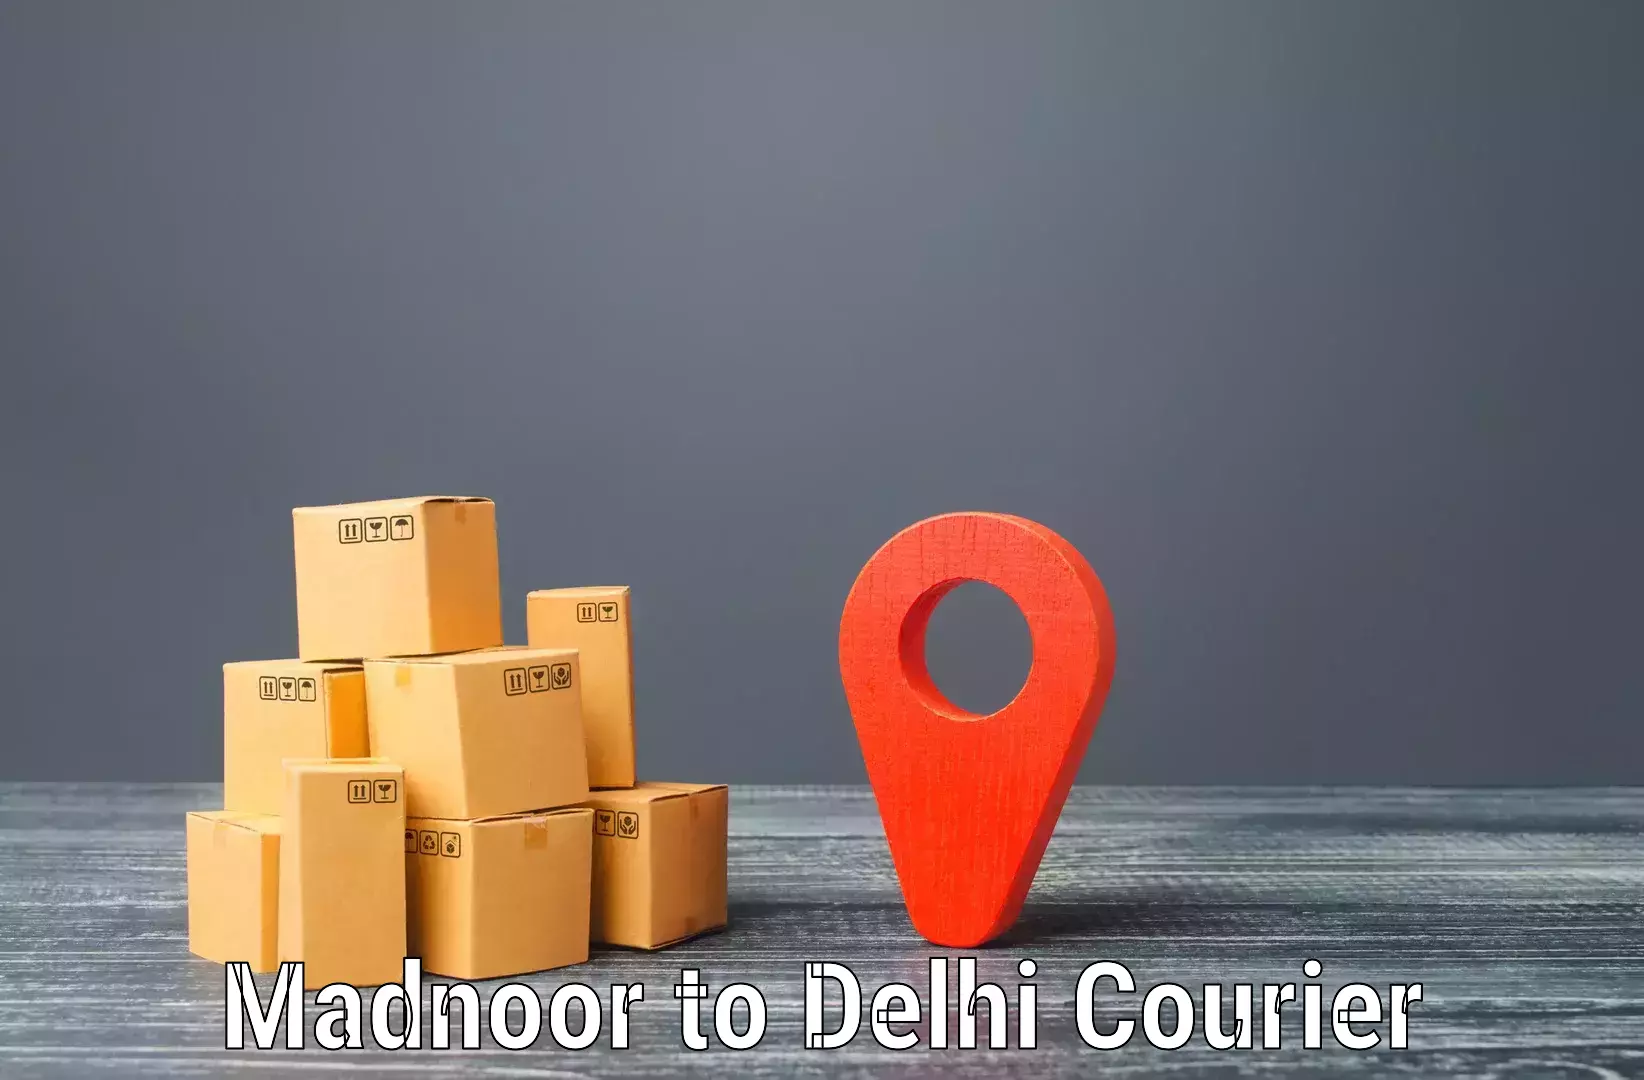 Multi-national courier services Madnoor to NCR